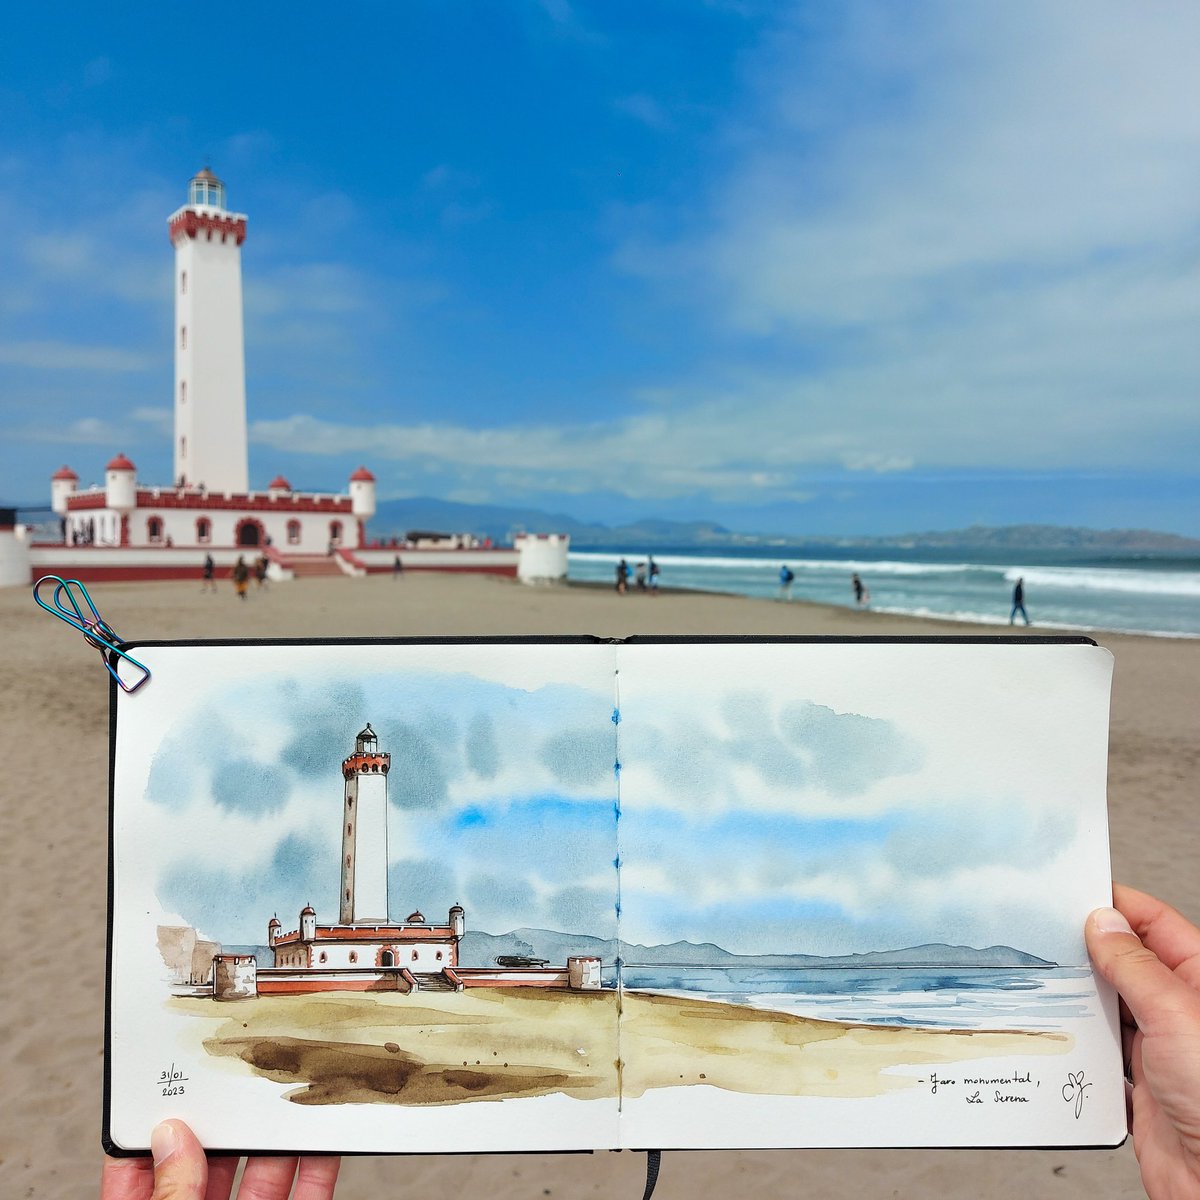 Always inspired by lighthouses ✨️

#LaSerena #Chile #cile #sketch #sketchbook #art #Travel #watercolor #Watercolourpainting #paint #traveldiaries